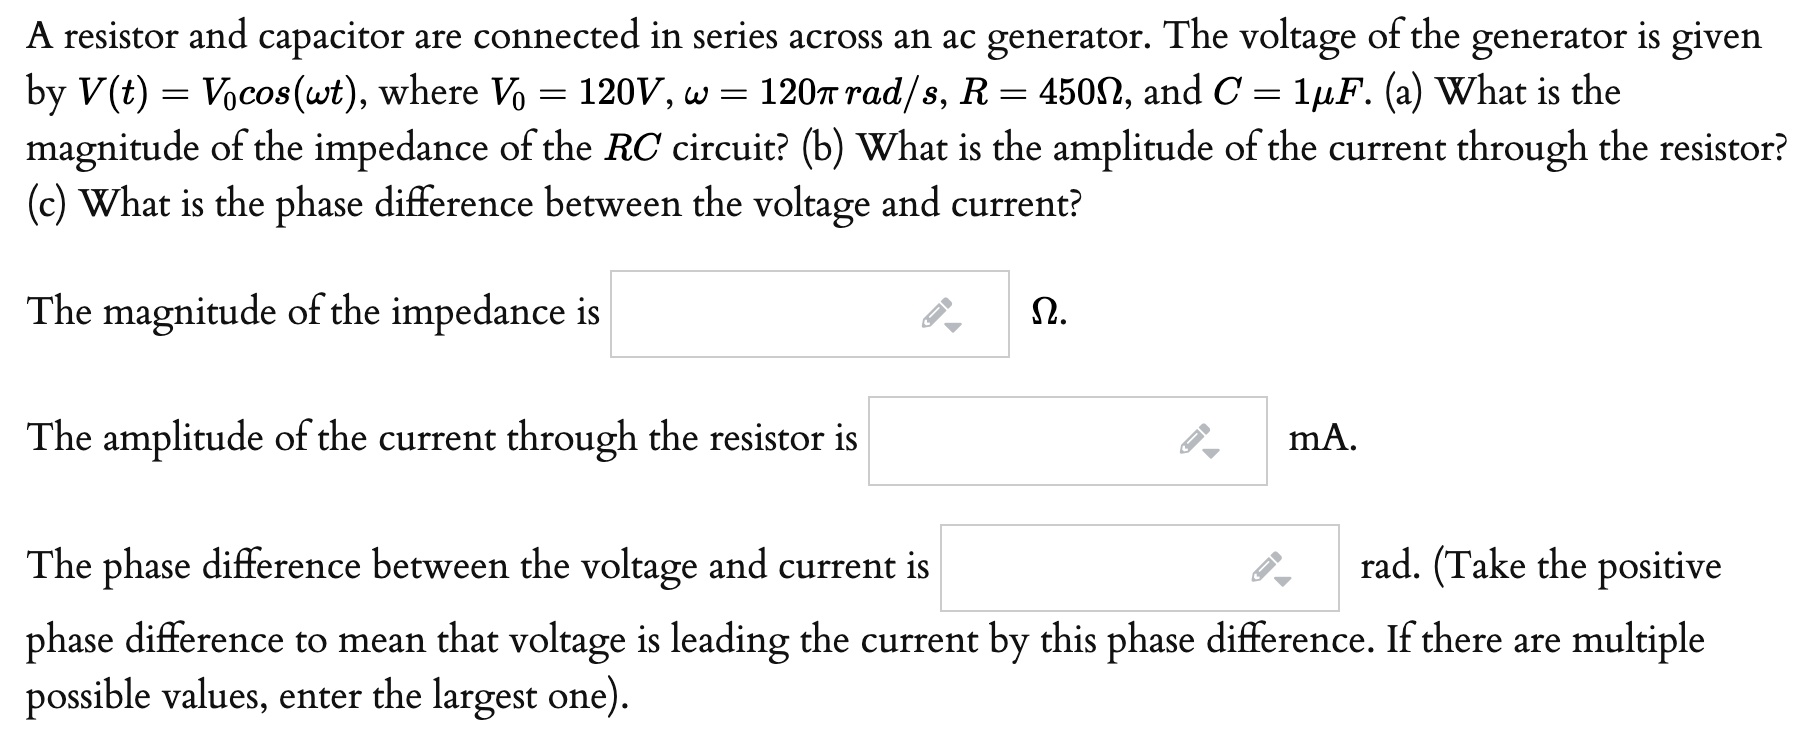 A resistor and capacitor are connected in series across an ac generator. The voltage of the generator is given
by V(t) = Vocos(wt), where Vo = 120V, w =
magnitude of the impedance of the RC circuit? (b) What is the amplitude of the current through the resistor?
(c) What is the phase difference between the voltage and current?
120T rad/s, R = 450N, and C = 1µF. (a) What is the
The magnitude of the impedance is
Ω.
The amplitude of the current through the resistor is
mA.
The phase difference between the voltage and current is
rad. (Take the positive
phase difference to mean that voltage is leading the current by this phase difference. If there are multiple
possible values, enter the largest one).
